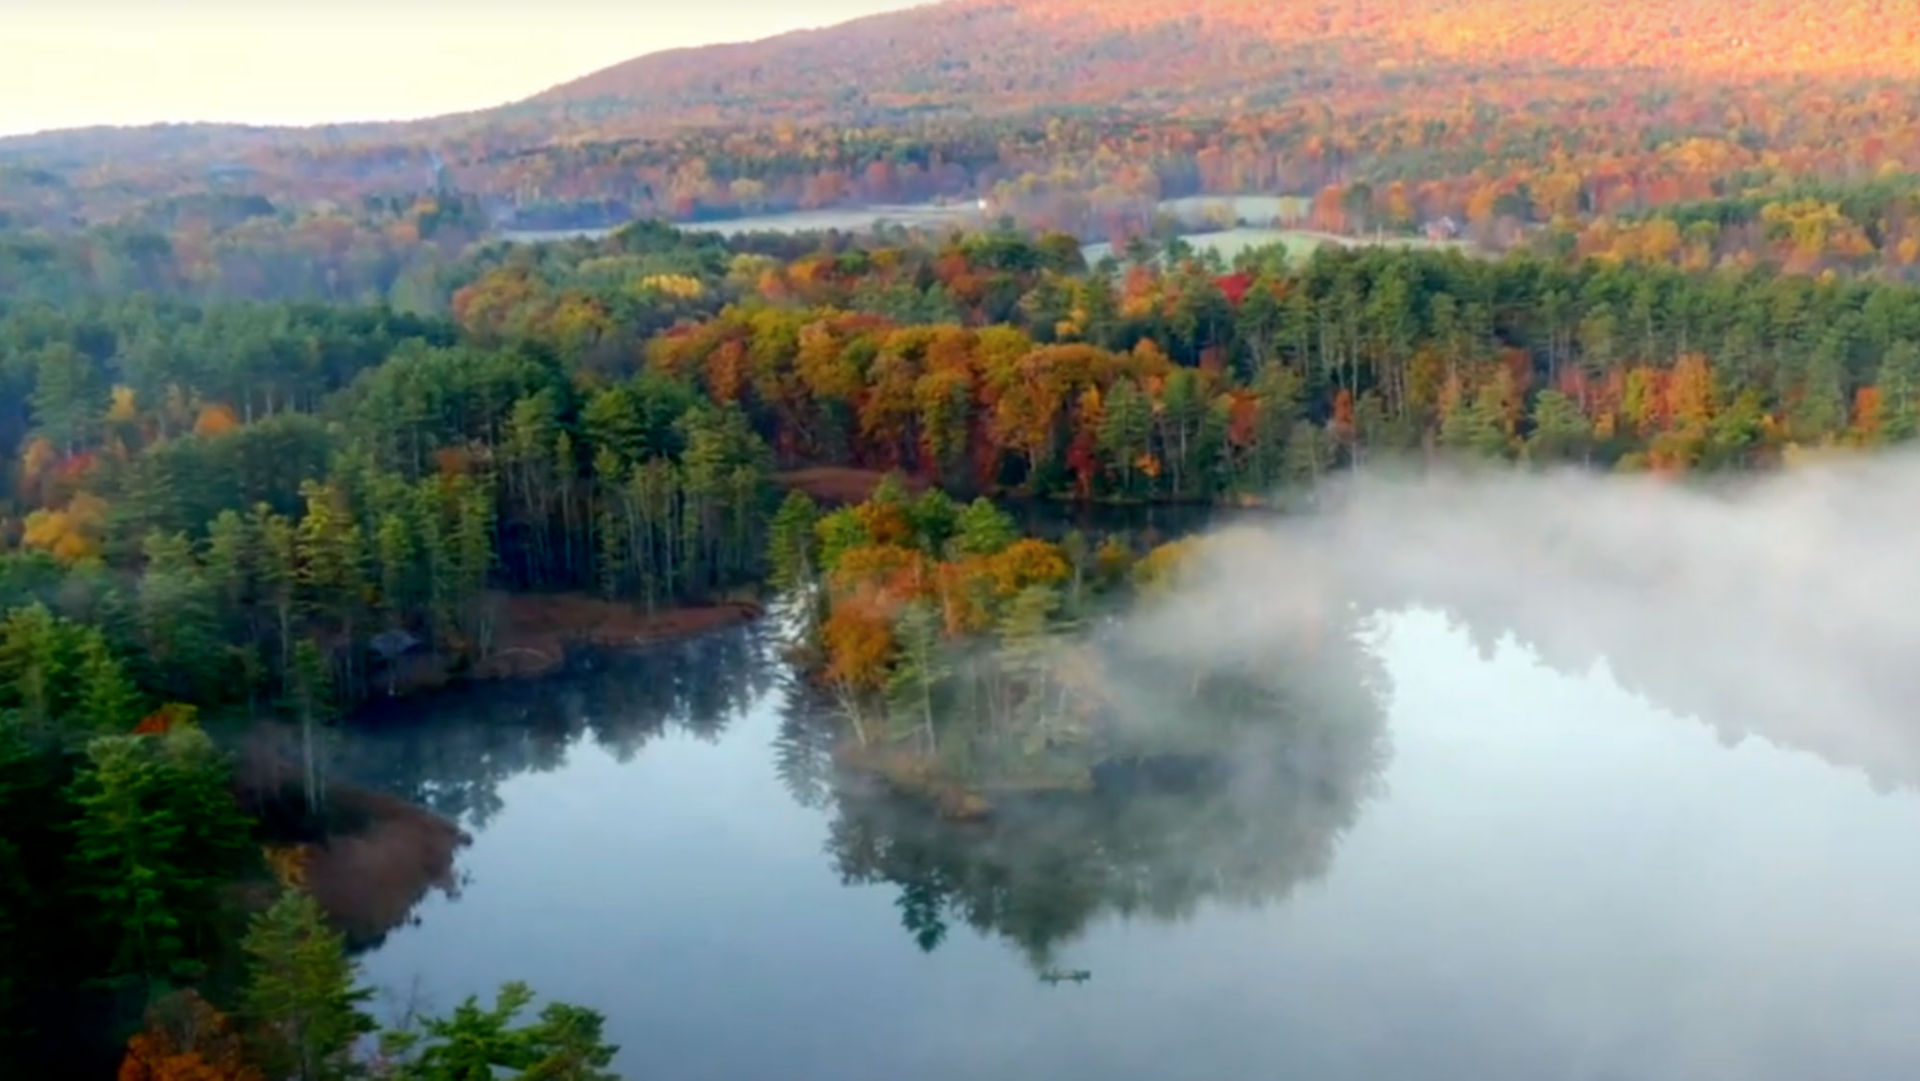 An aerial view of fog lifting off an autumn lake with hills in background